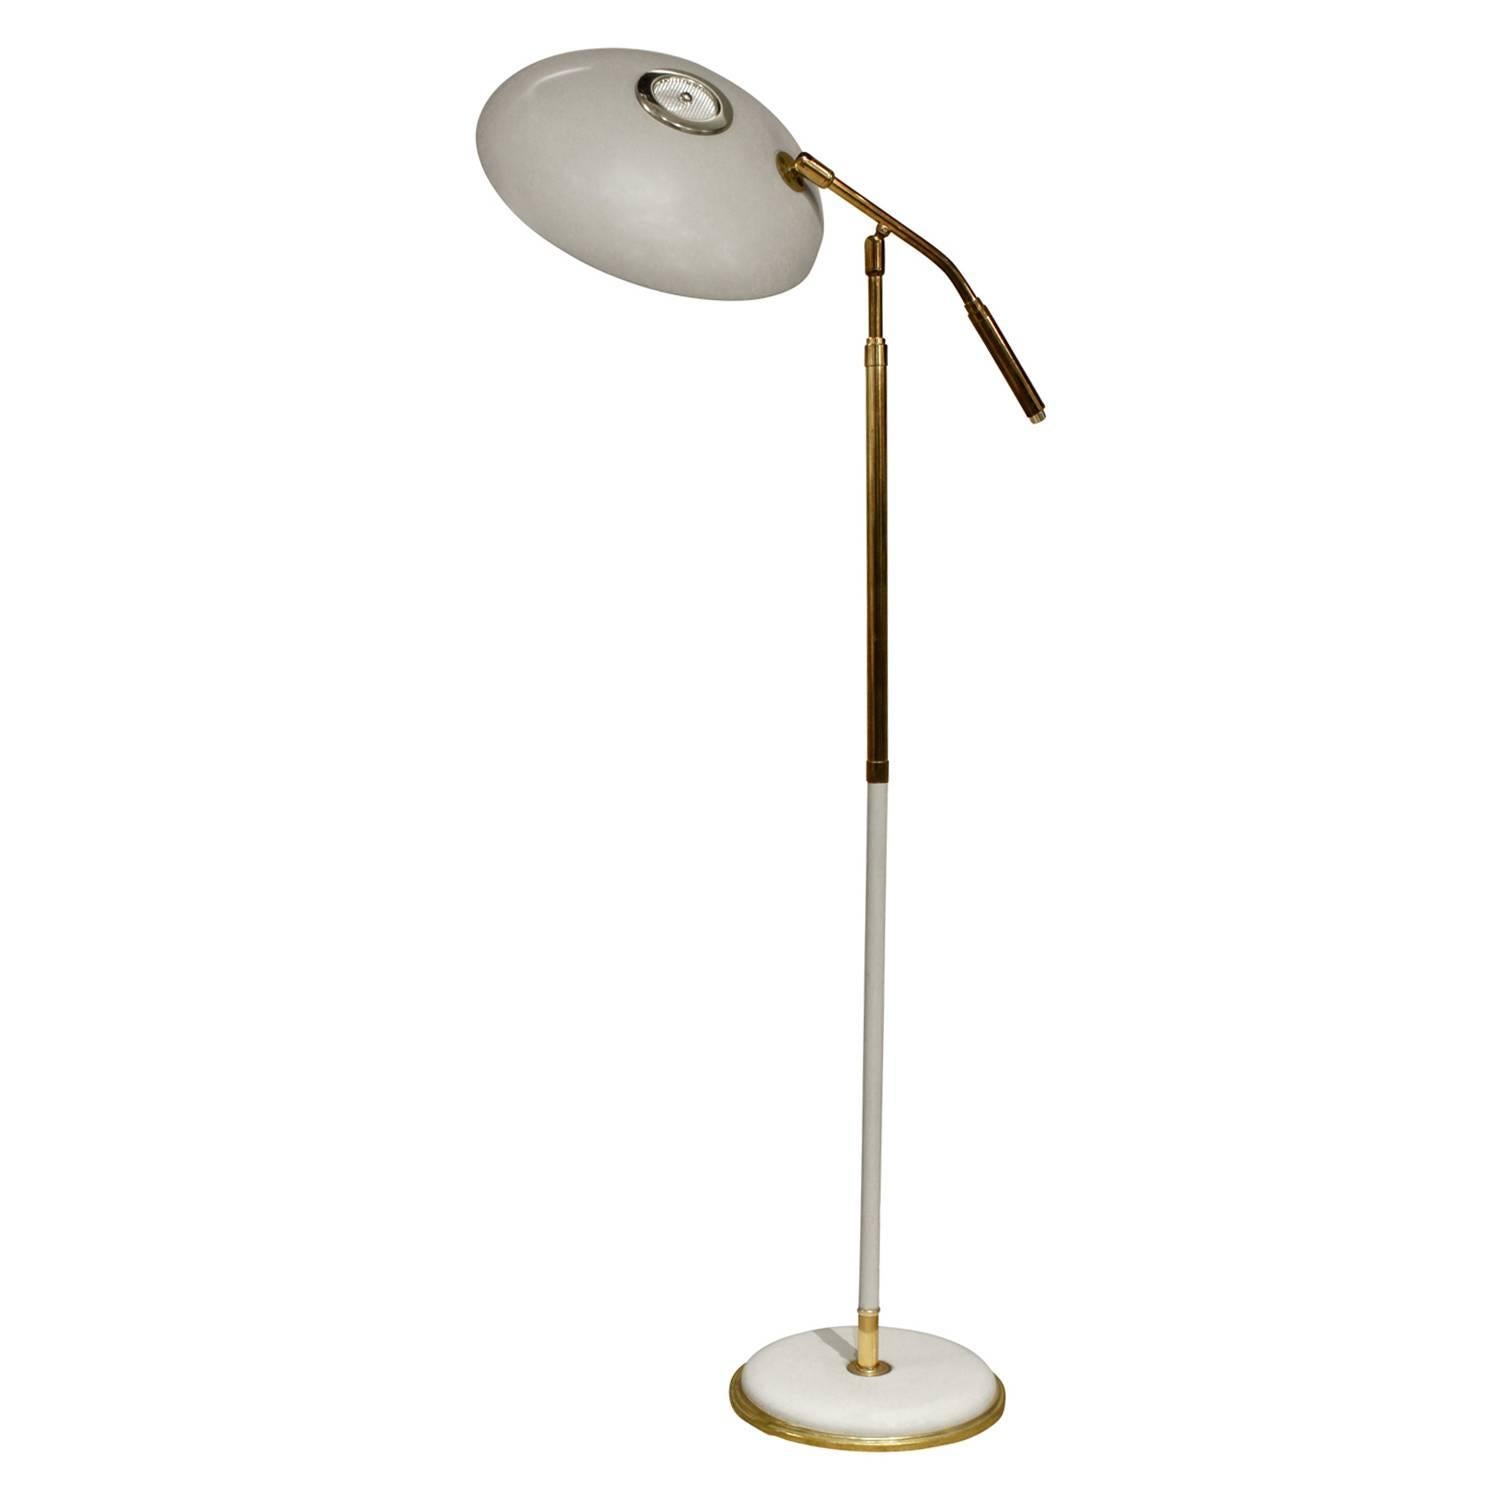 Chic articulating reading lamp in brass with ivory lacquer and bulb diffuser by Gerald Thurston for Lightolier, American, 1950s.
 